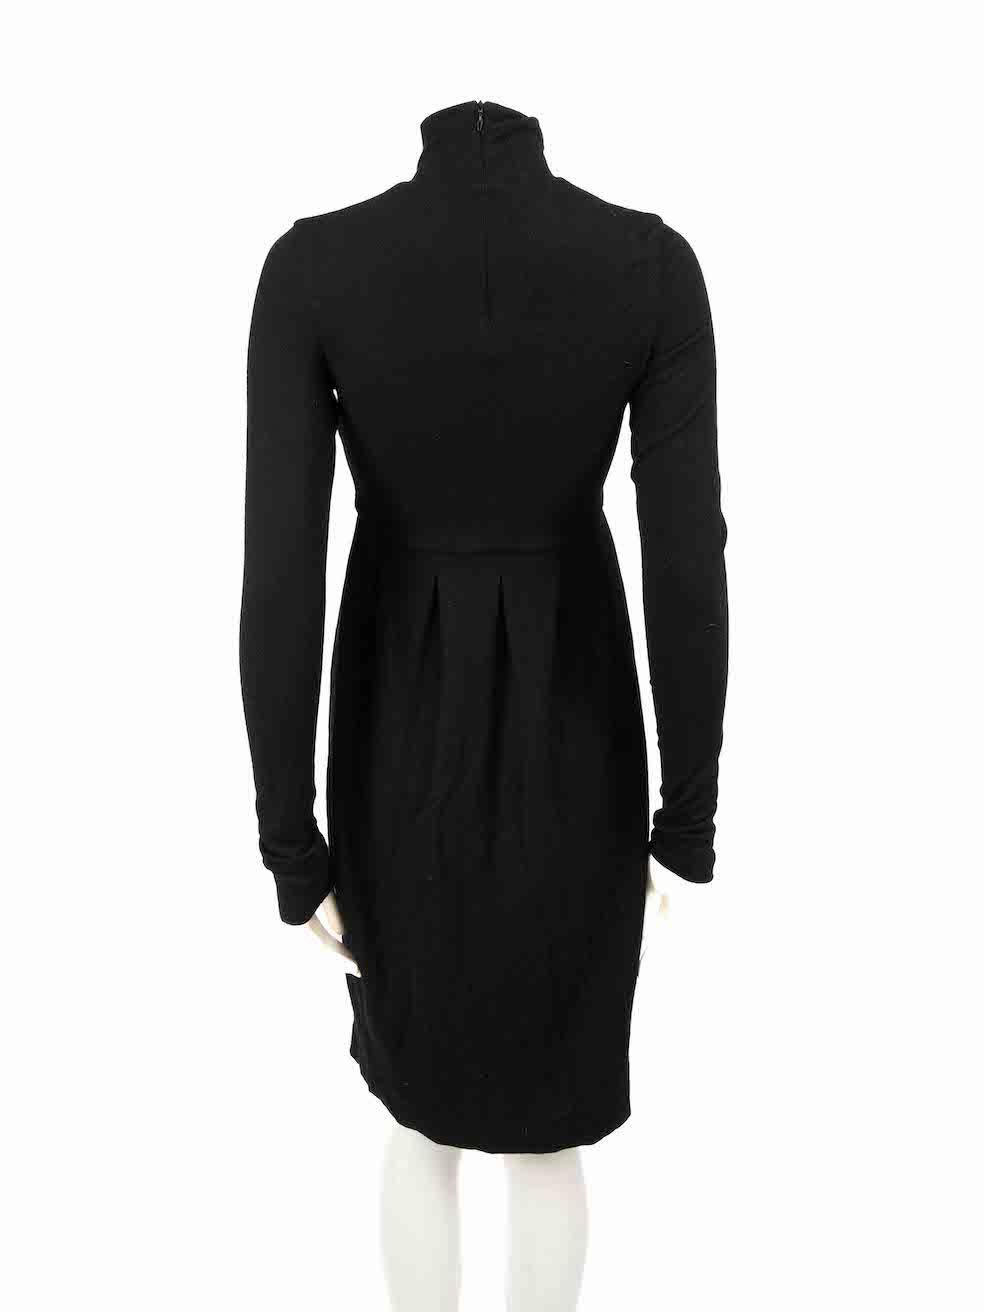 Jil Sander Black Wool Turtleneck Pleated Dress Size S In Excellent Condition For Sale In London, GB